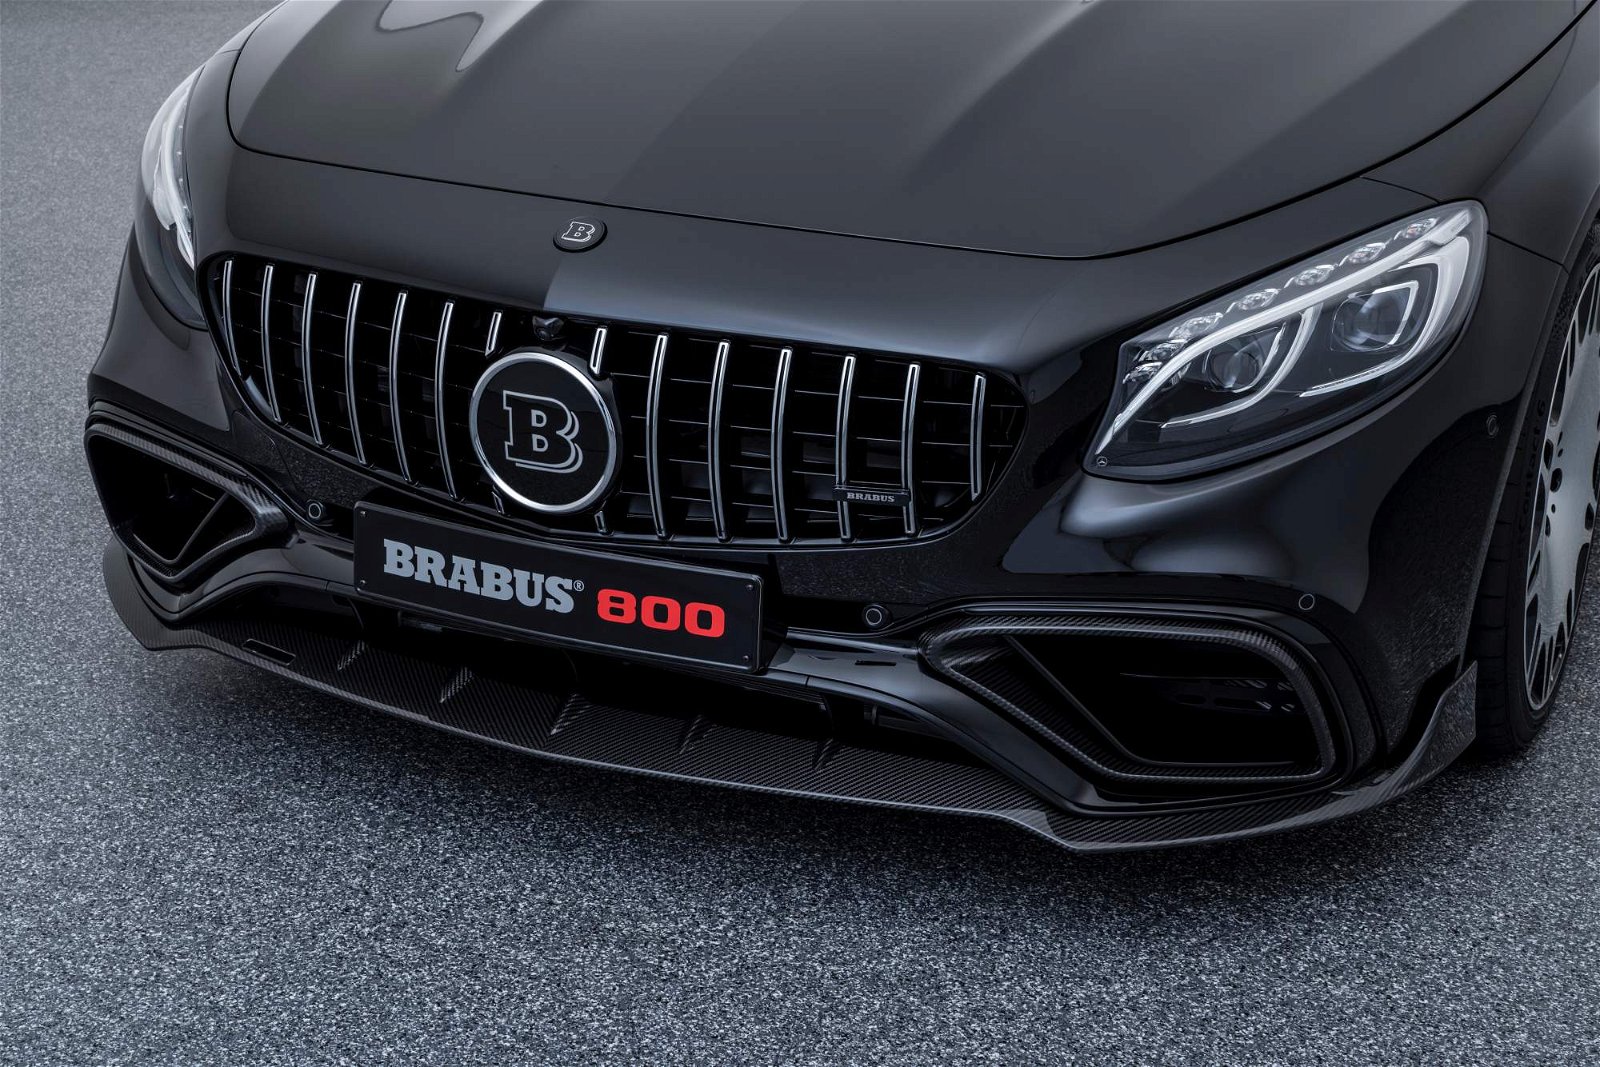 Brabus-800-based-on-Mercedes-AMG-S63-4MATIC+-Coupe-8